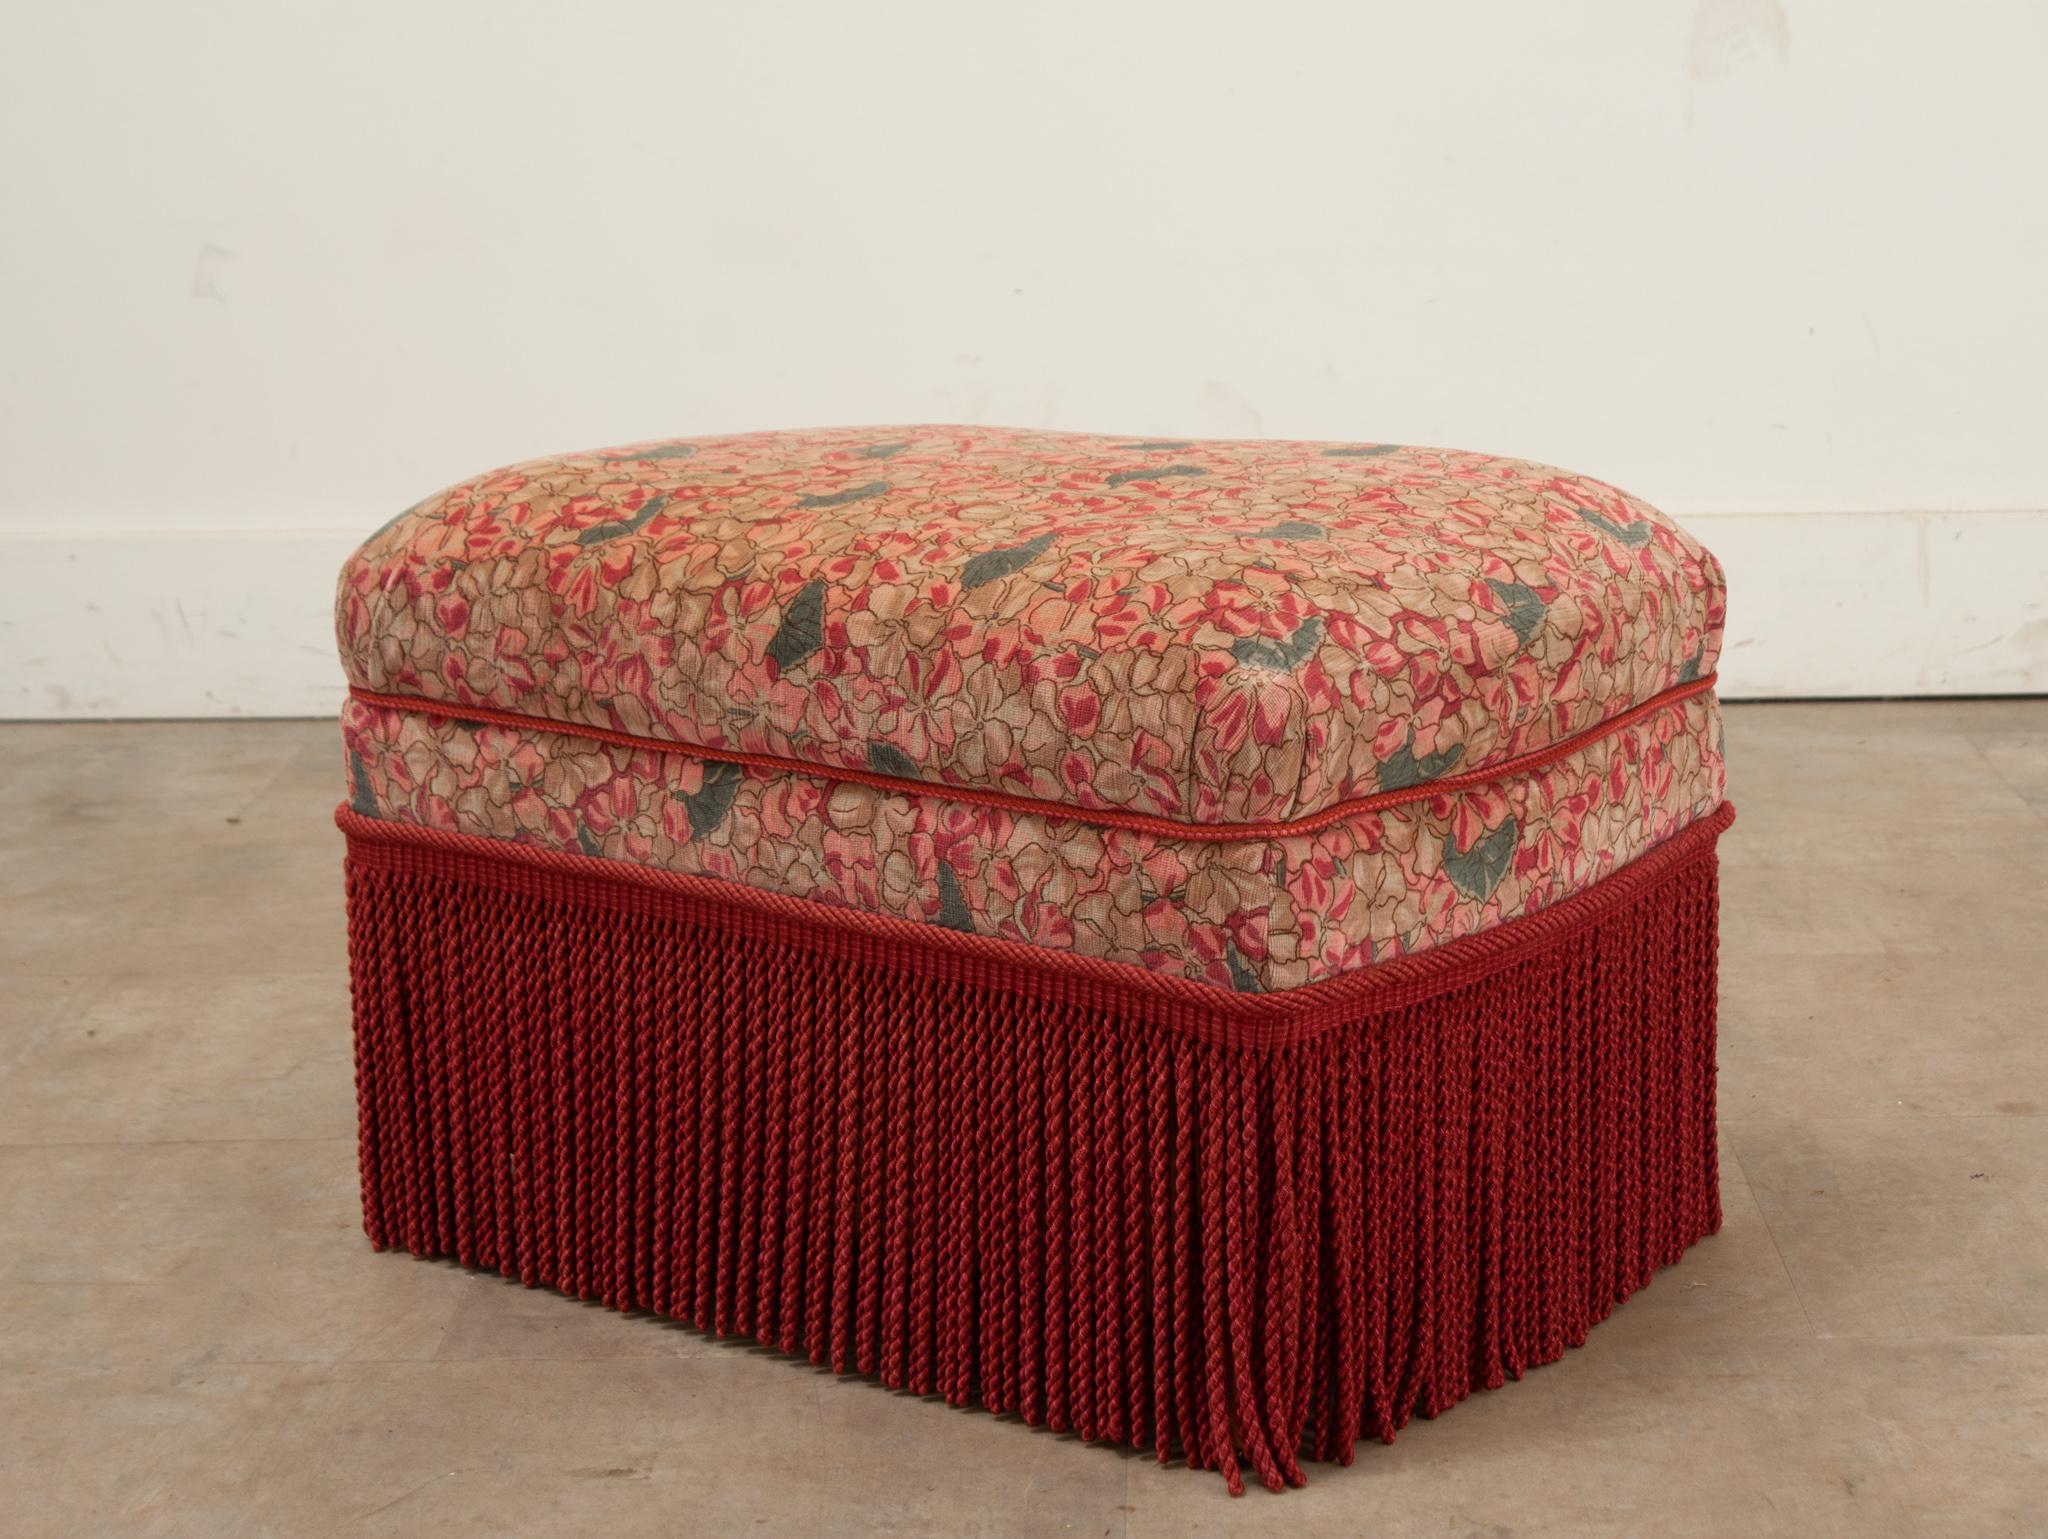 A French vintage stool upholstered in a multicolored floral print fabric with coordinating fringe. The top lifts off to reveal a storage cavity 8”H x 18 ⅛”W x 13”D. Be sure to view the detailed images to see the current condition of this vintage